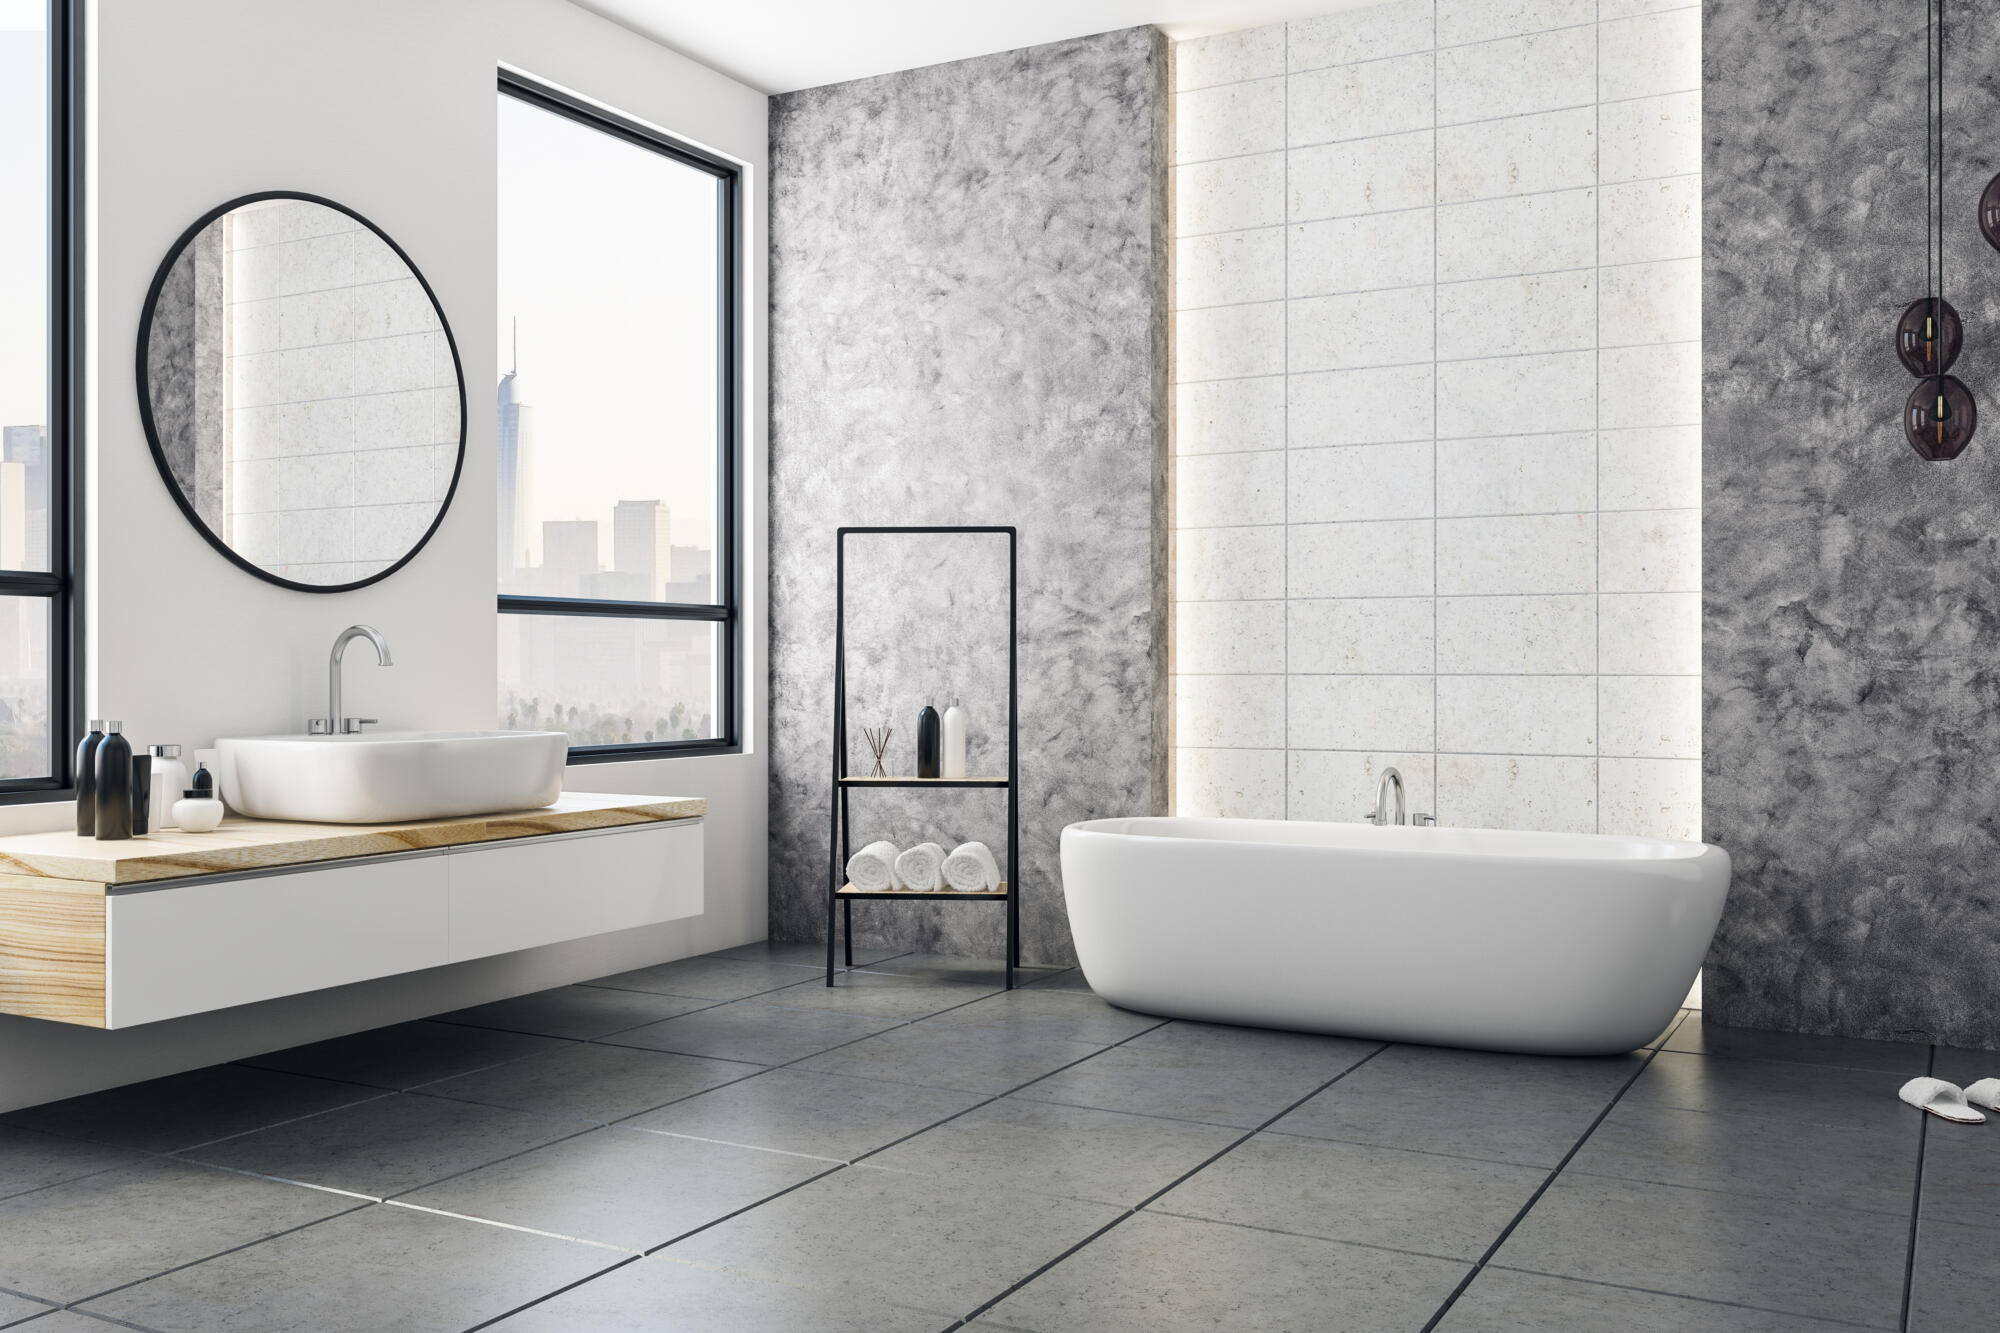 A modern bathroom with a bathtub and sink designed for functionality and style.